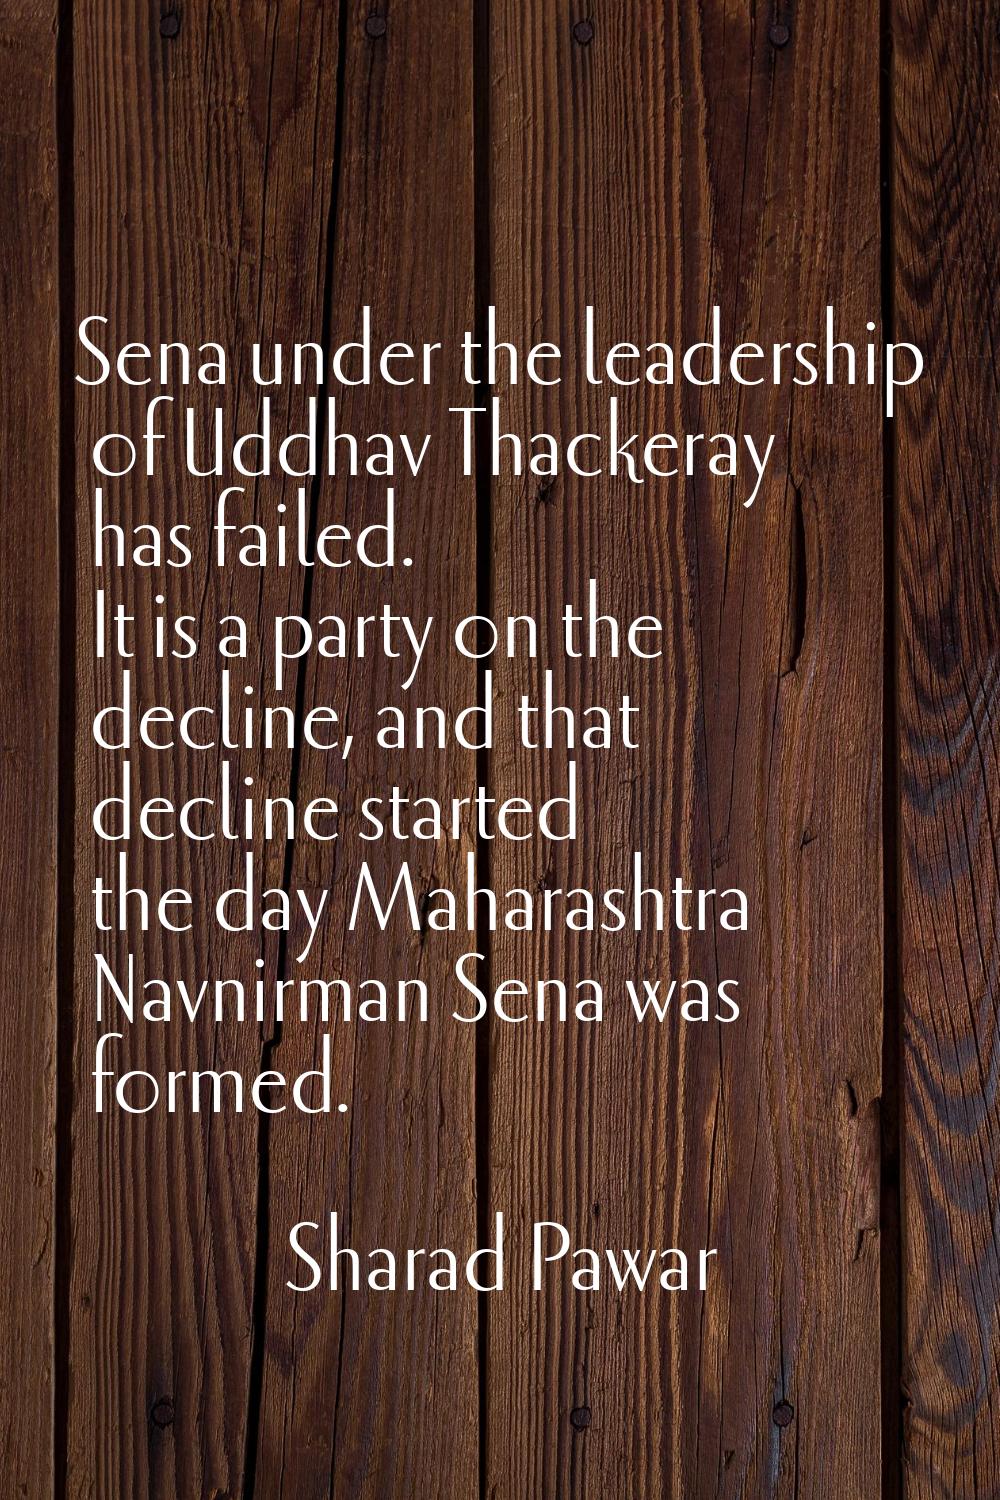 Sena under the leadership of Uddhav Thackeray has failed. It is a party on the decline, and that de